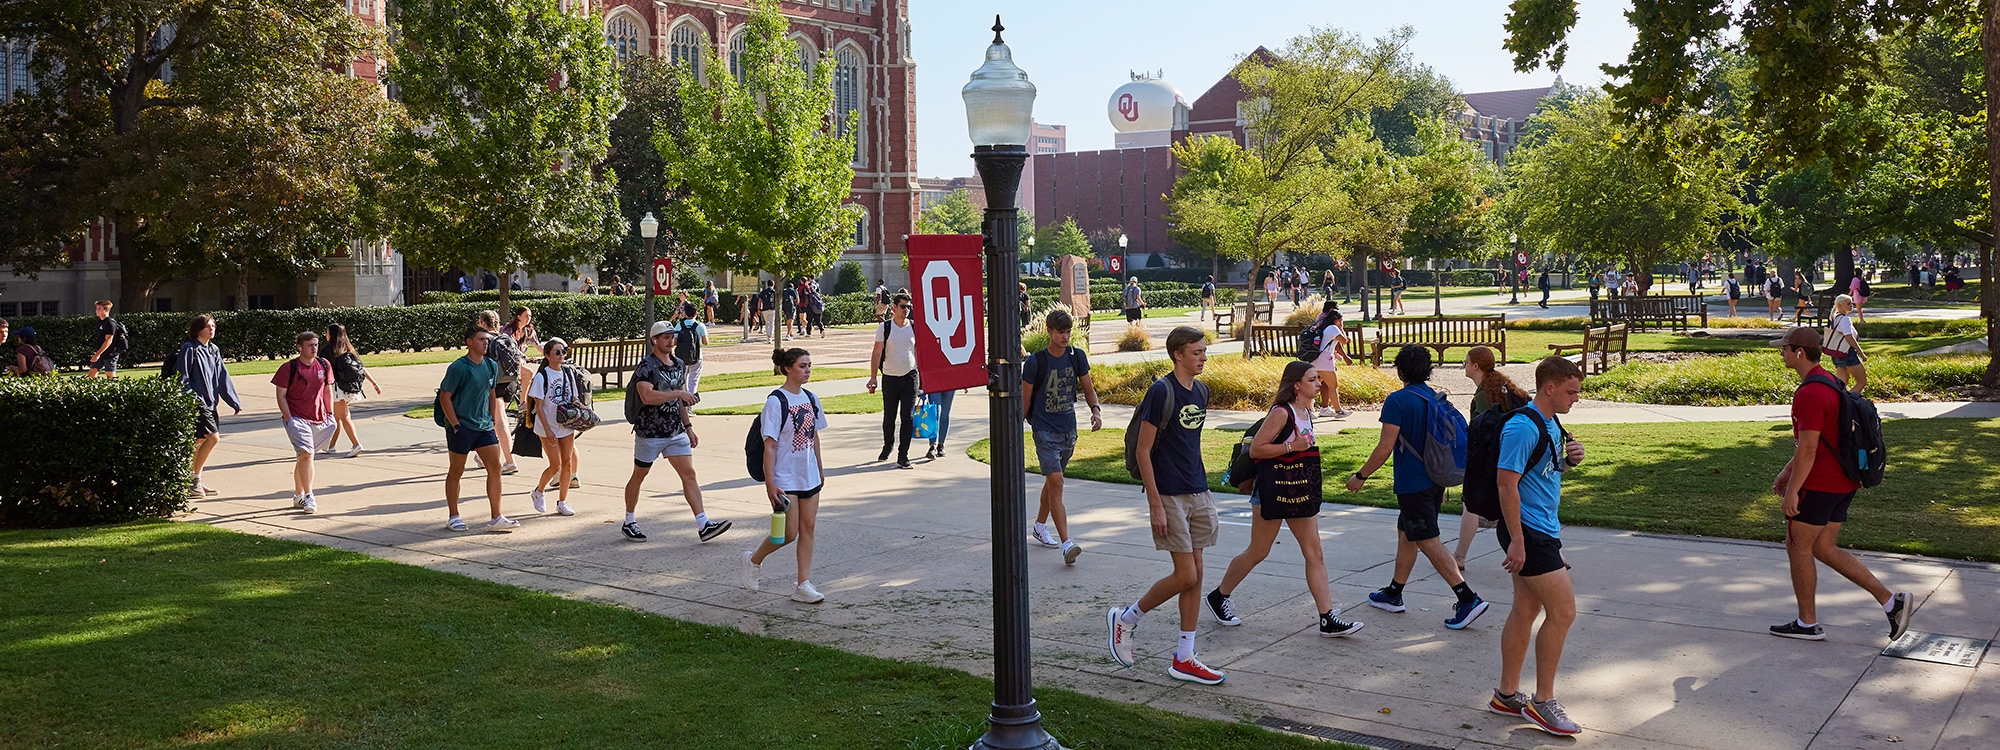 Students walking on a sunny day on the South Oval of the OU campus in Norman, Oklahoma.